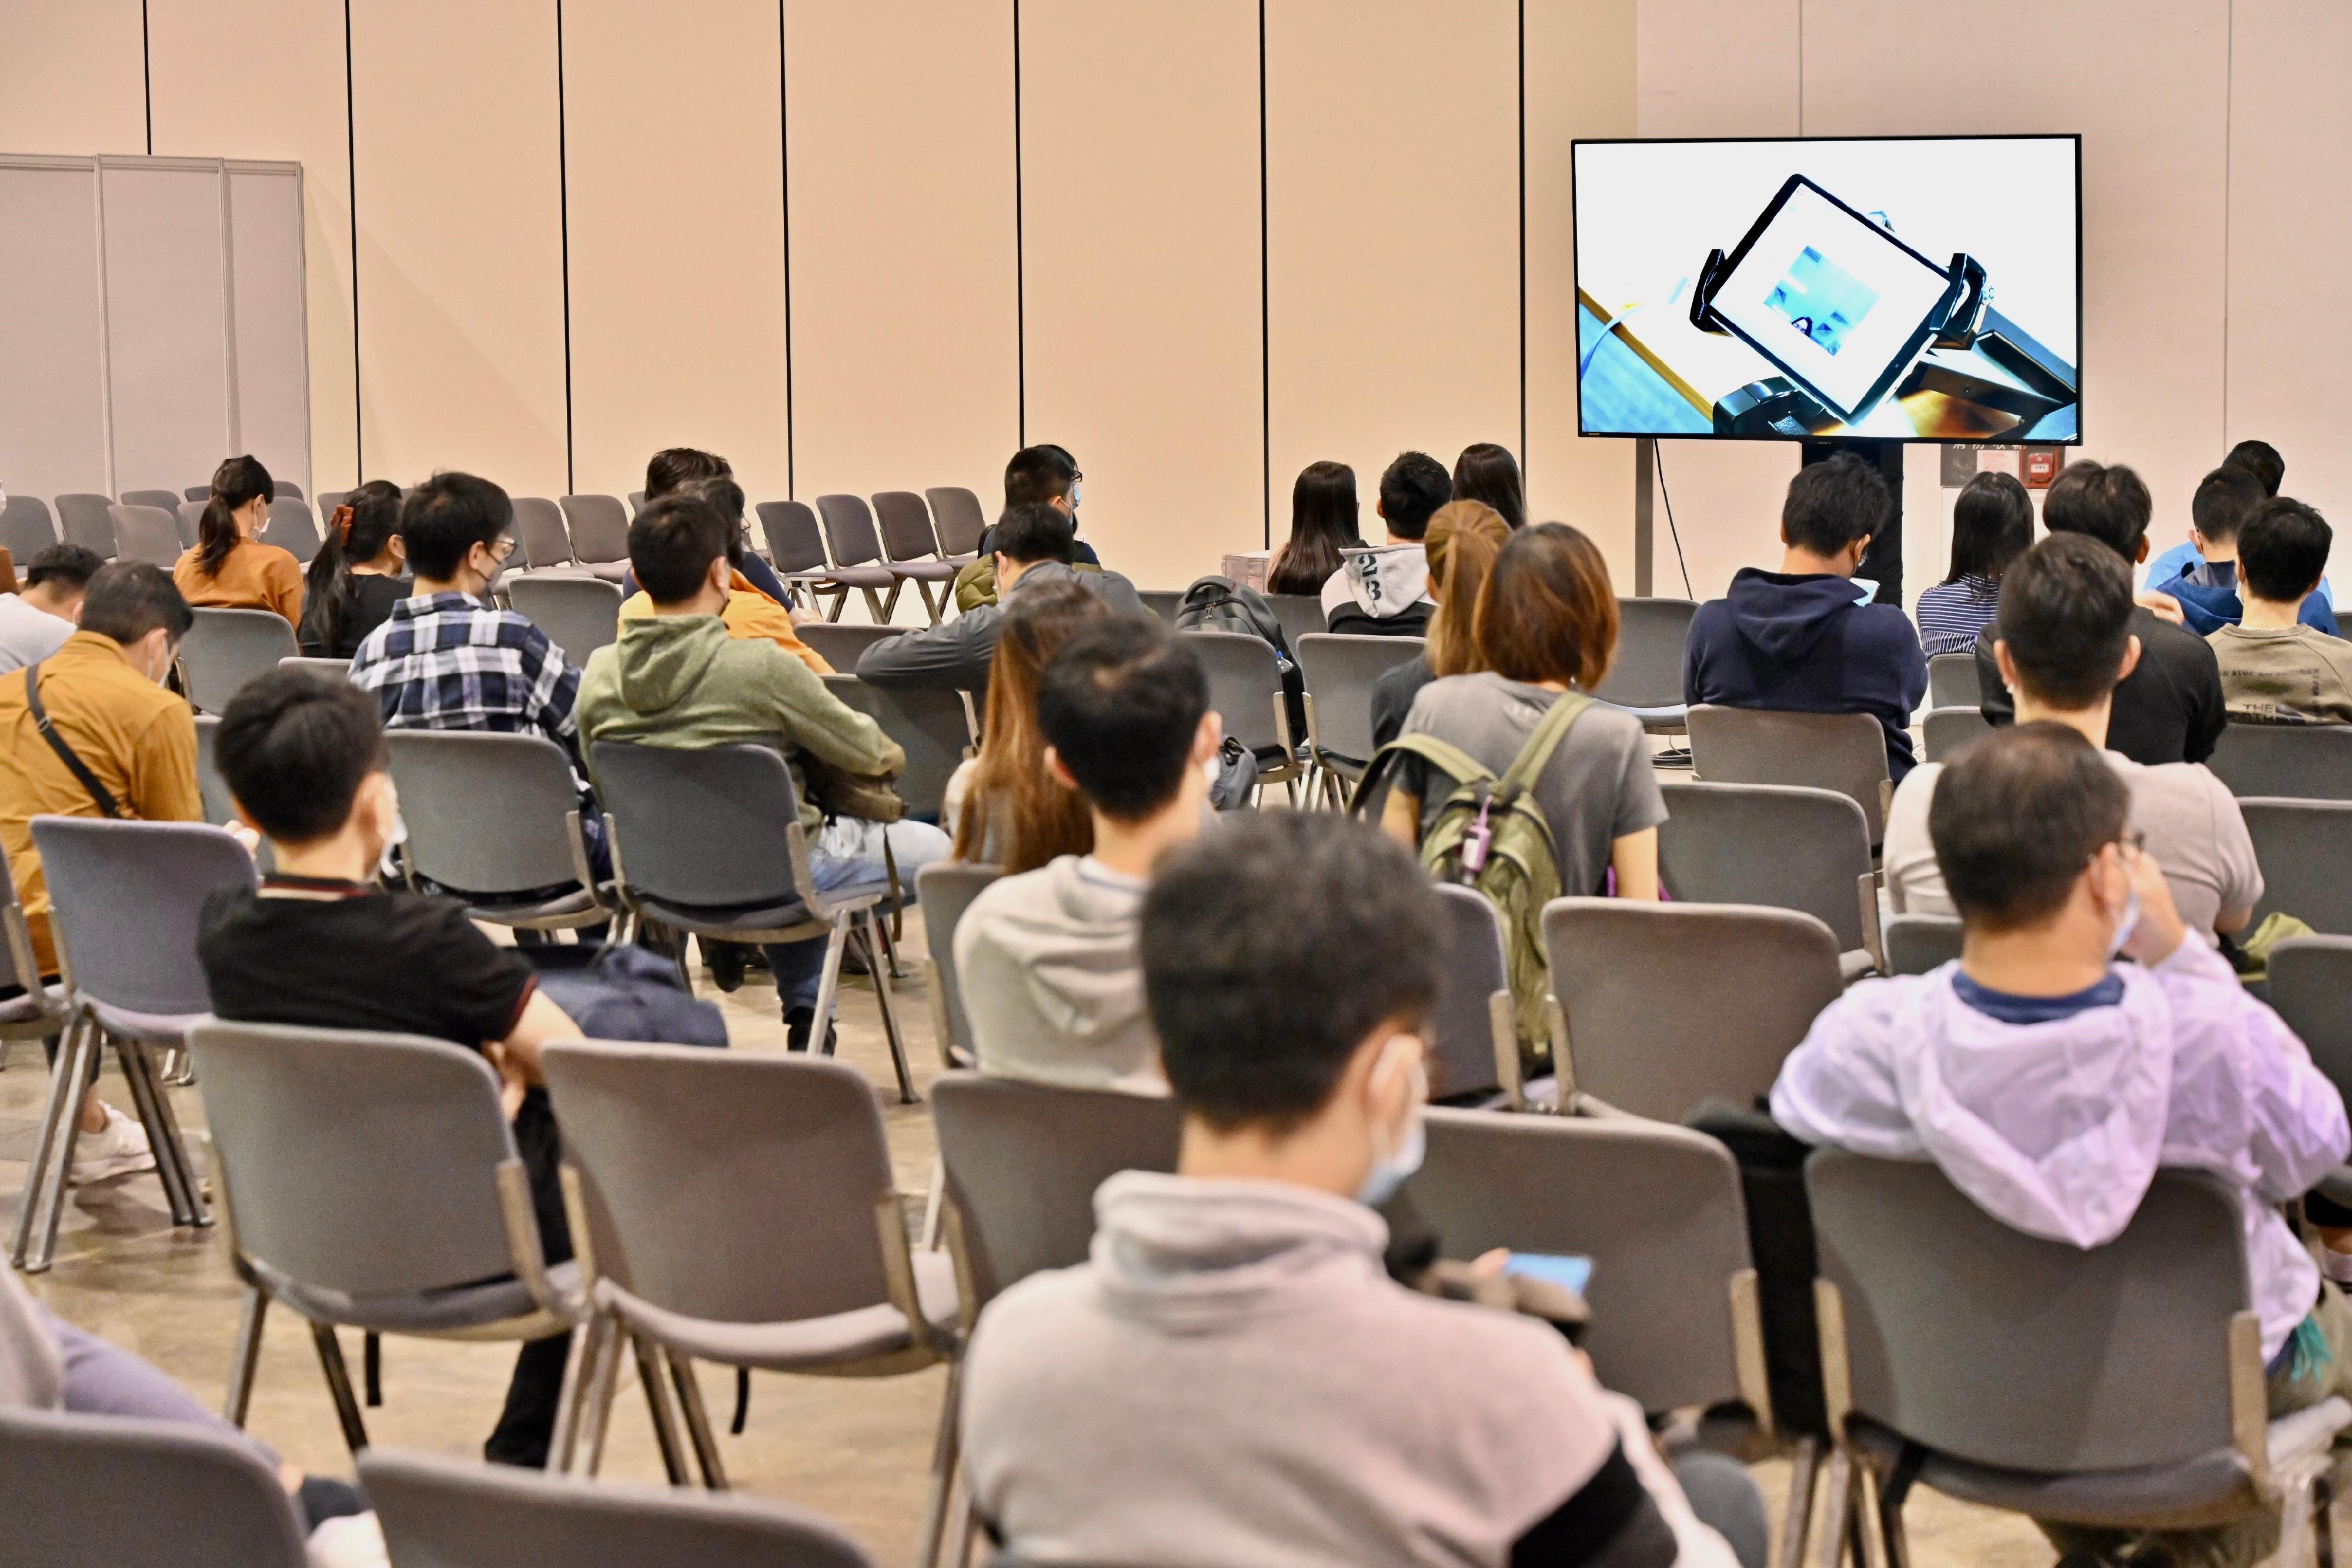 The 2021 Legislative Council General Election will be held on December 19. The Registration and Electoral Office organised a total of 20 hands-on practice sessions on the Electronic Poll Register system for over 10 000 polling staff. Photo shows polling staff watching the demonstration video.